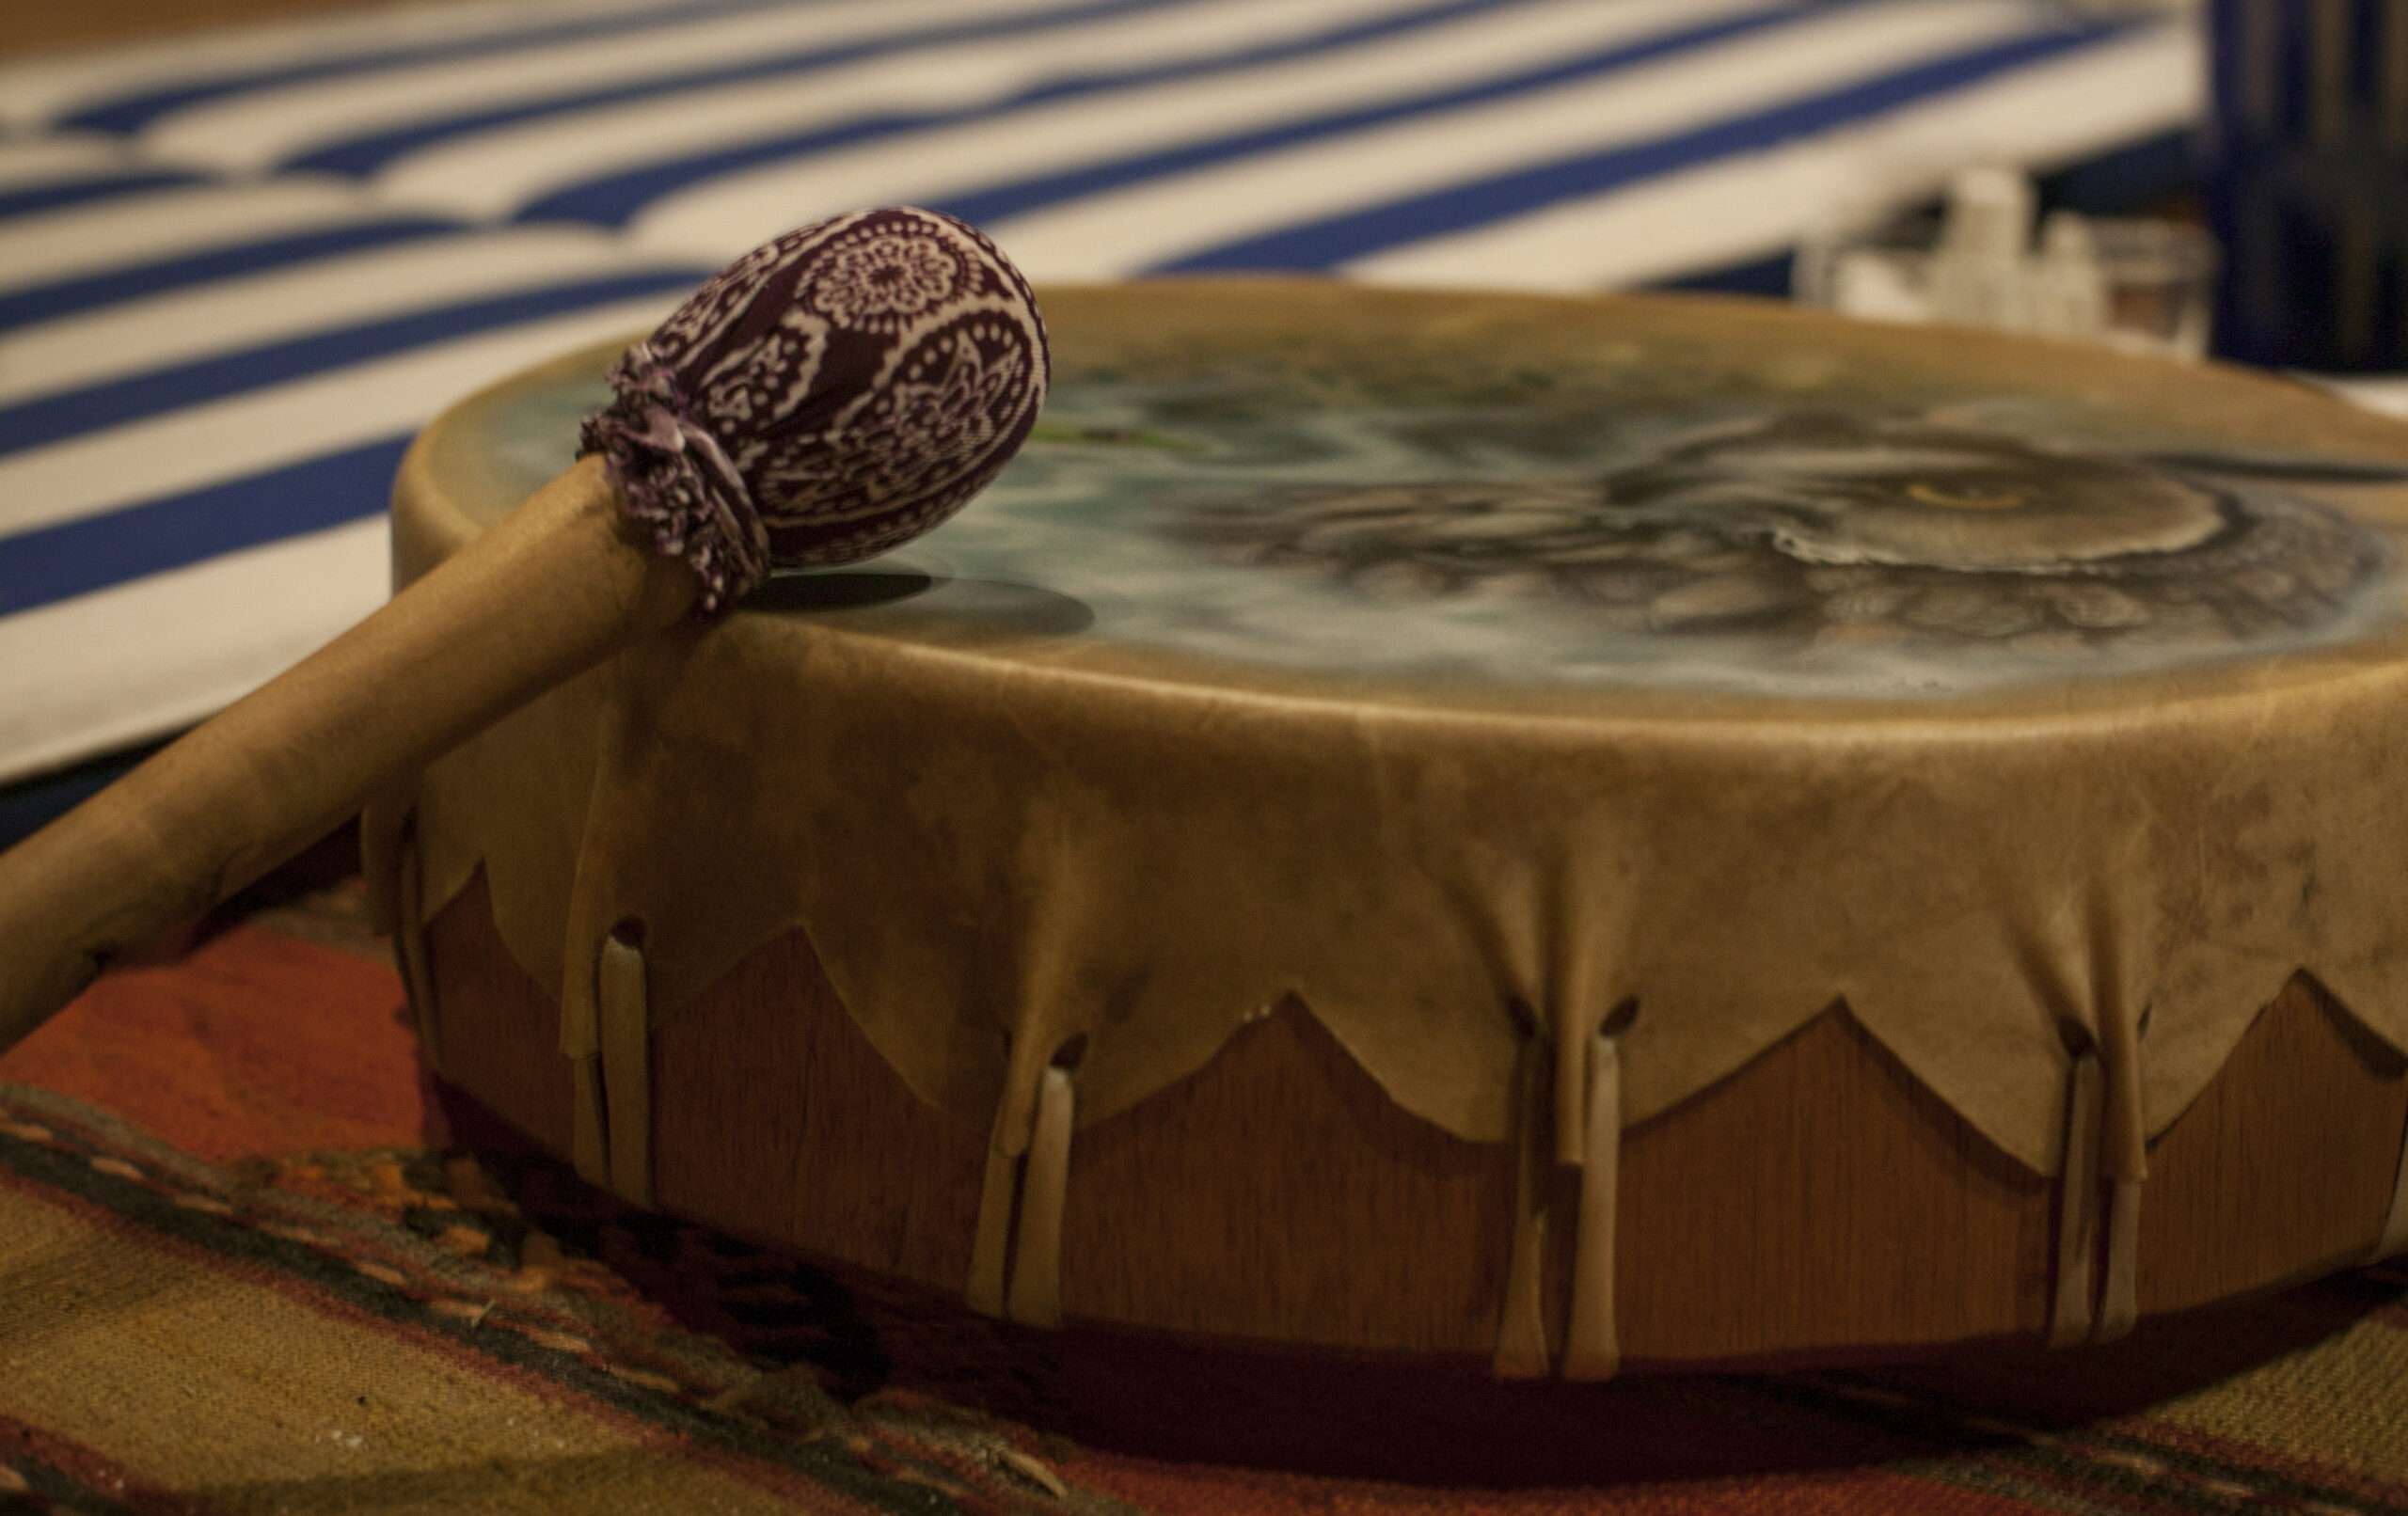 JOB POSTING FOR: Drumming Facilitator shamanic drum used special ceremonies such as ceremony with use ayahuasca scaled